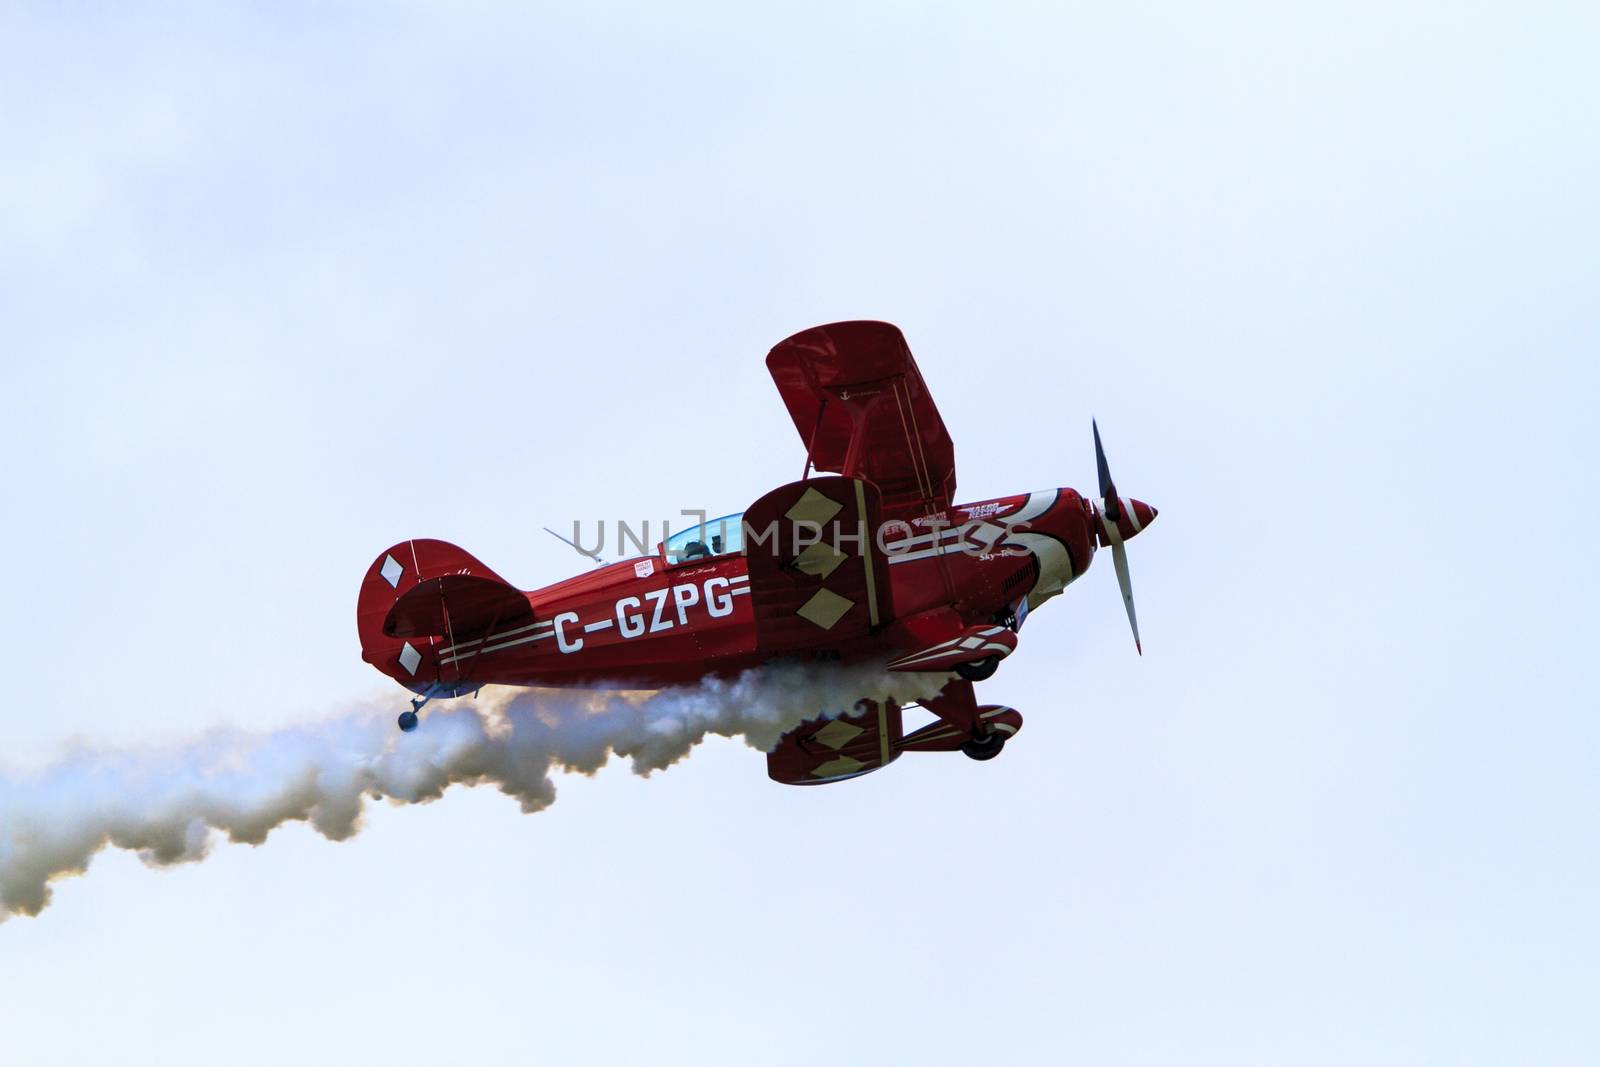 SPRINGBANK CANADA 20 JUL 2015: International Air Show and Open House for Canadian, USA and British current and historical military and civilian aircrafts. There were also numerous flights as well.